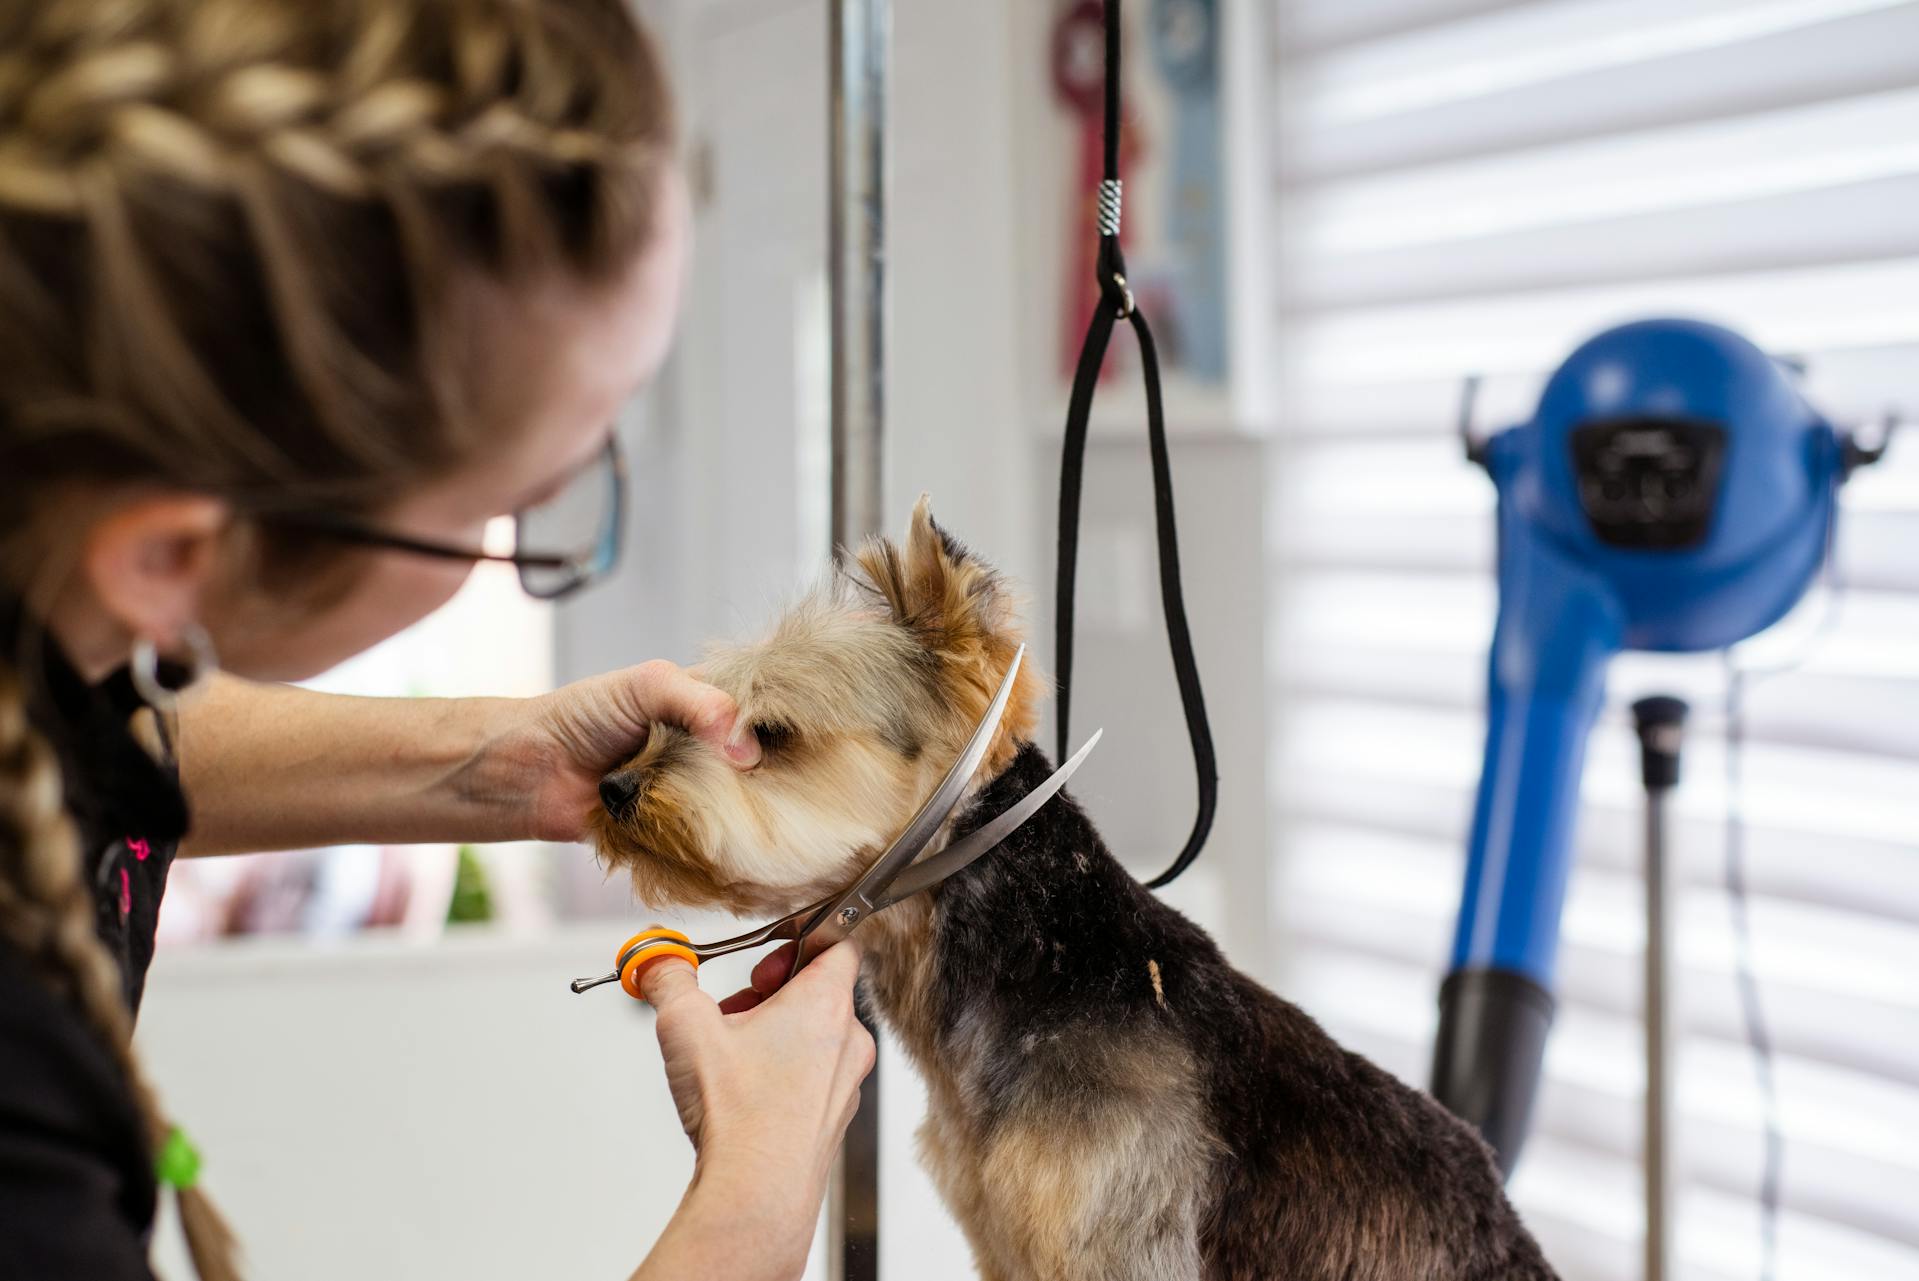 A person working with a dog | Source: Pexels